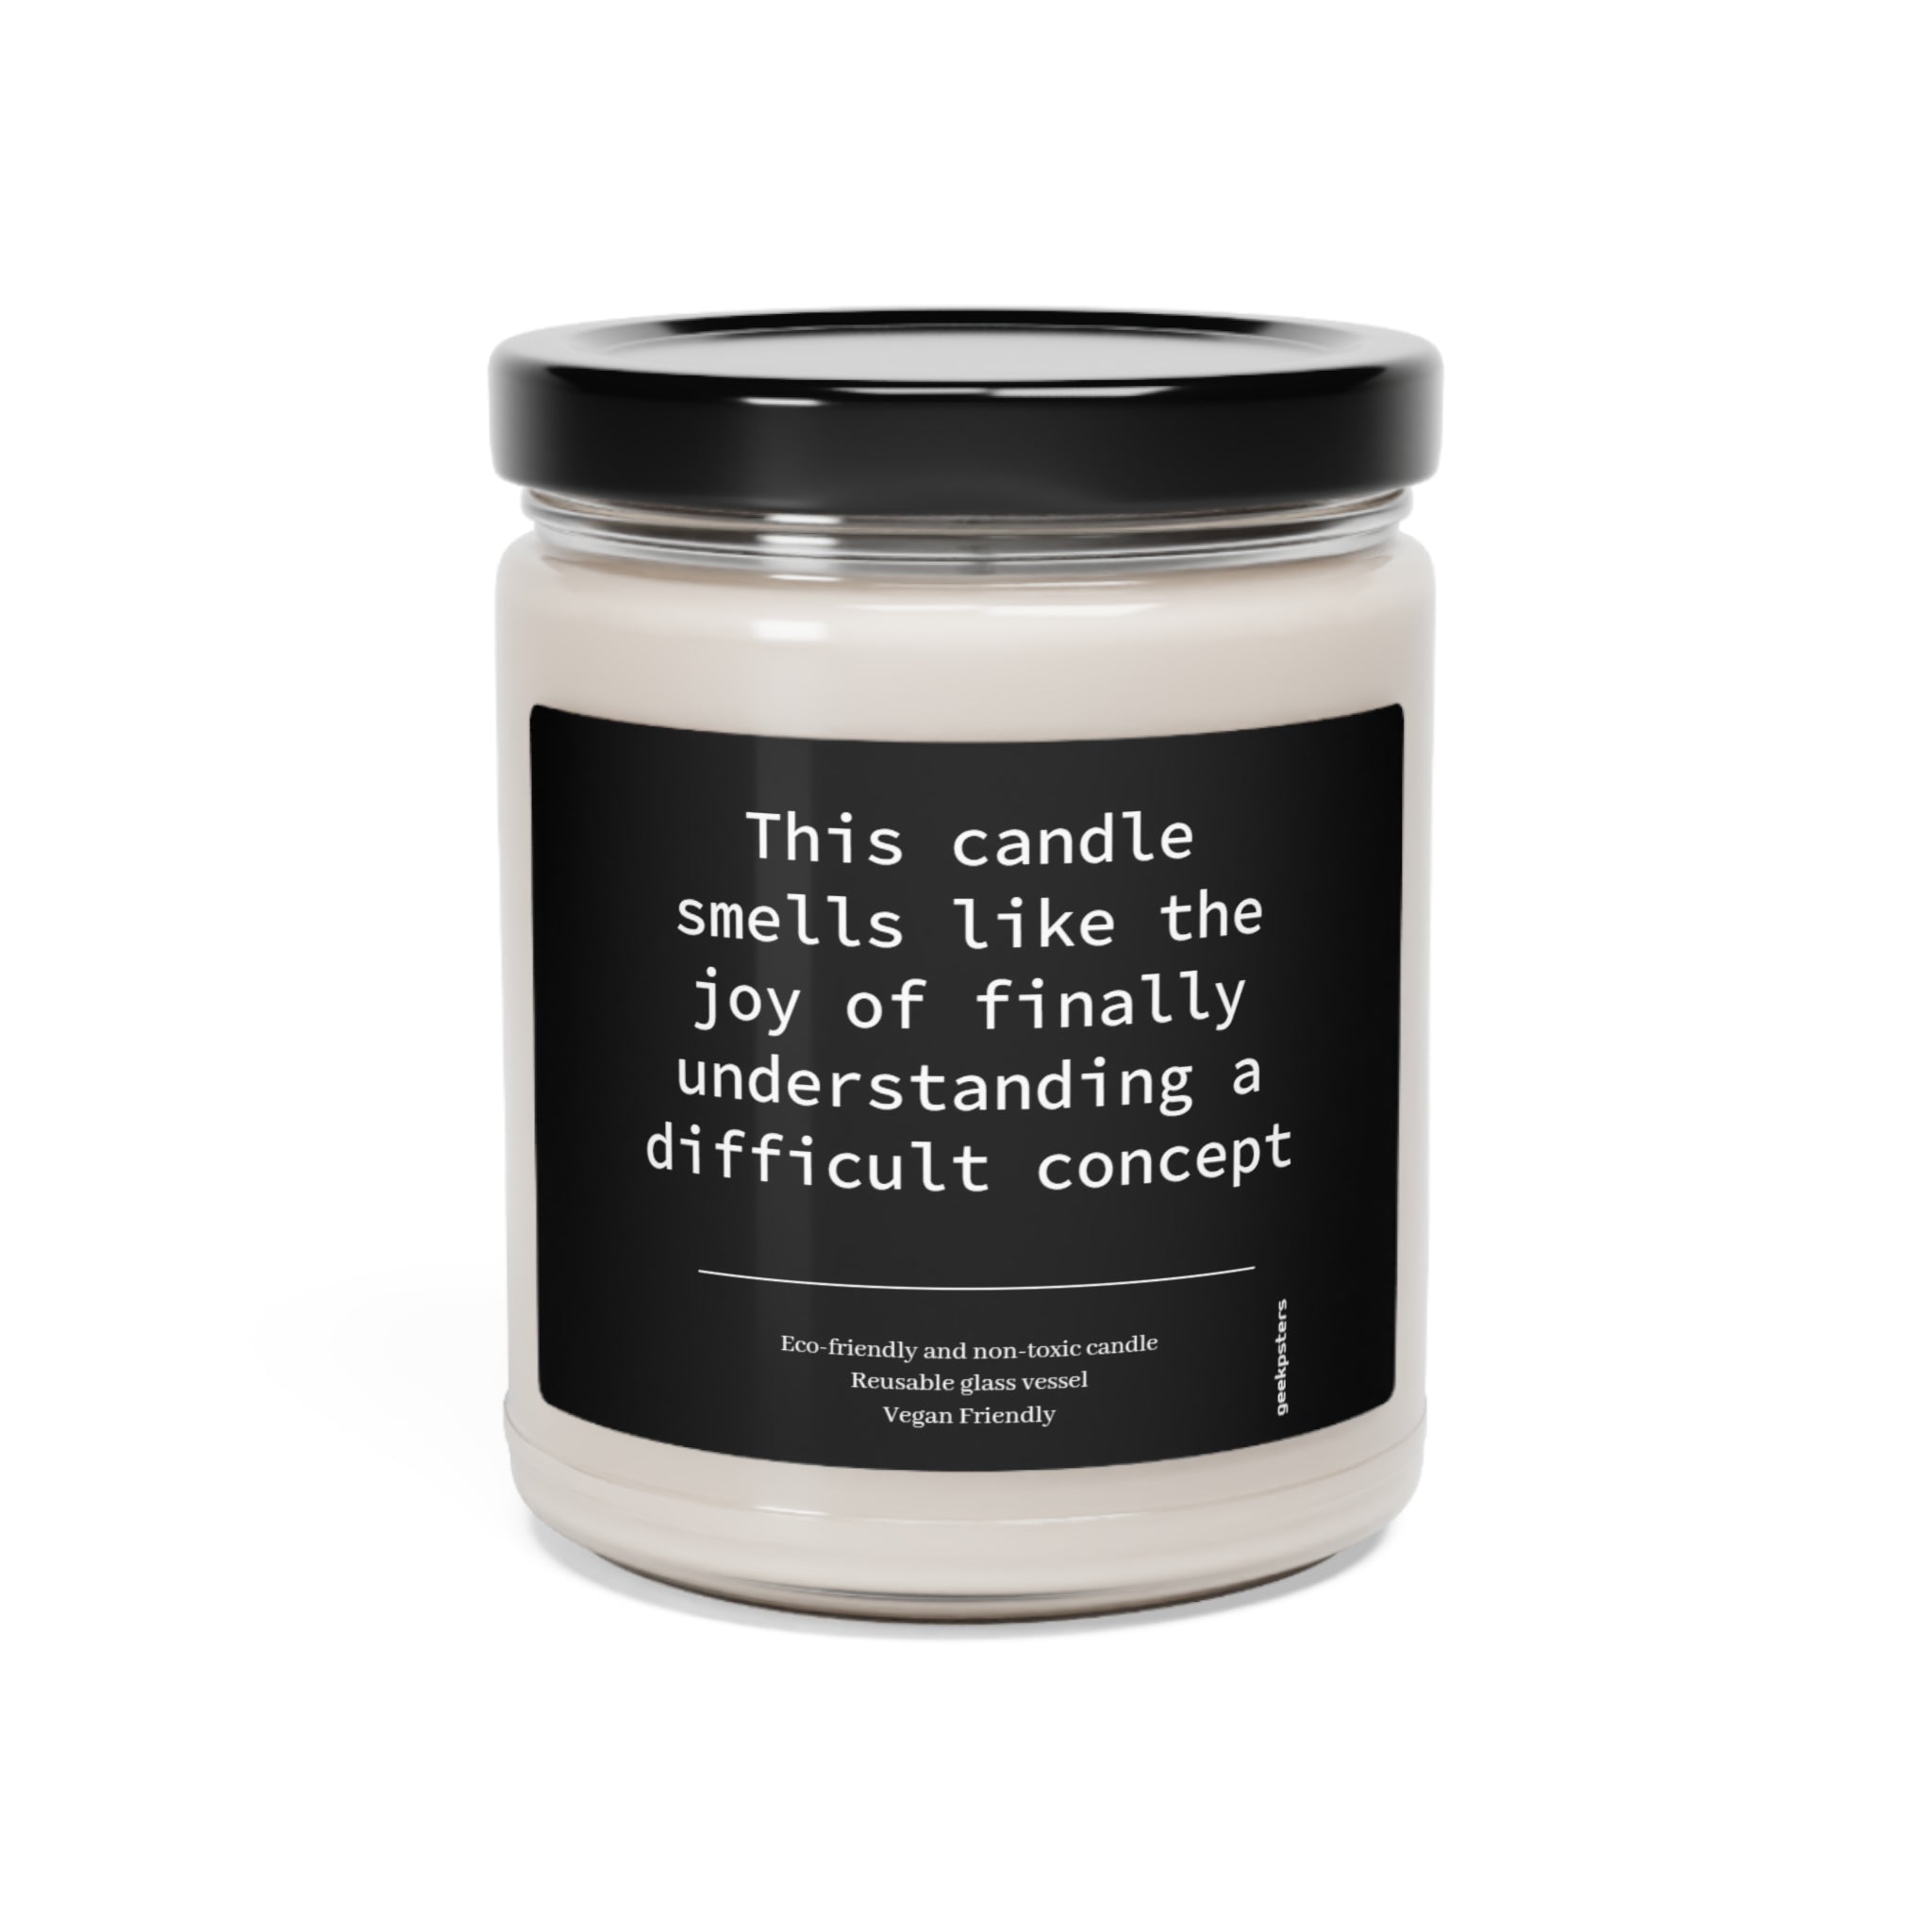 This Candle Smells Like the Joy of Finally Understanding a Difficult Concept scented soy candle in a clear jar, highlighting eco-friendly and soy candle features.